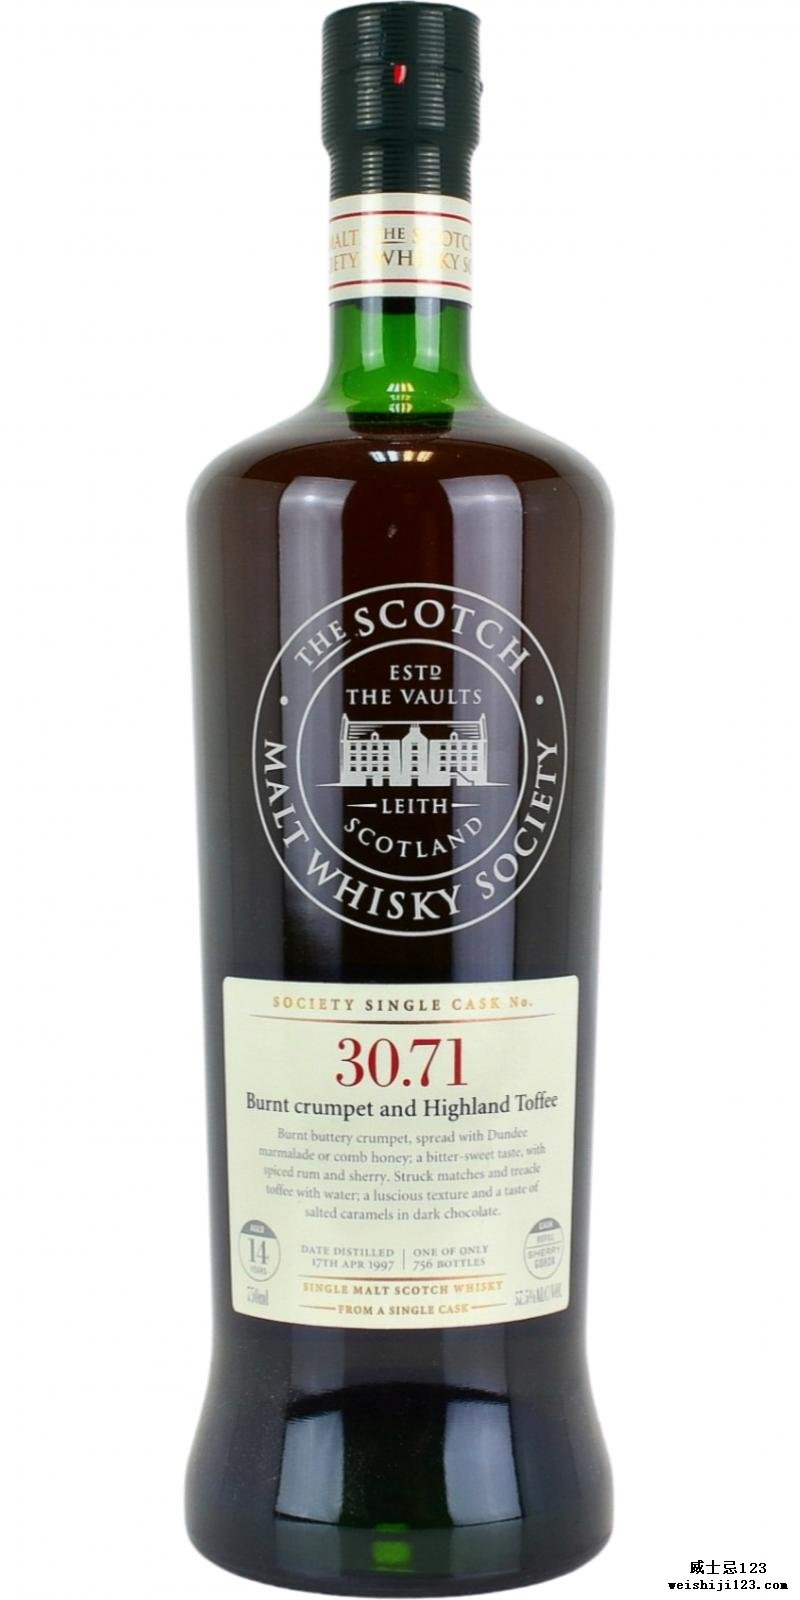 Glenrothes 1997 SMWS 30.71